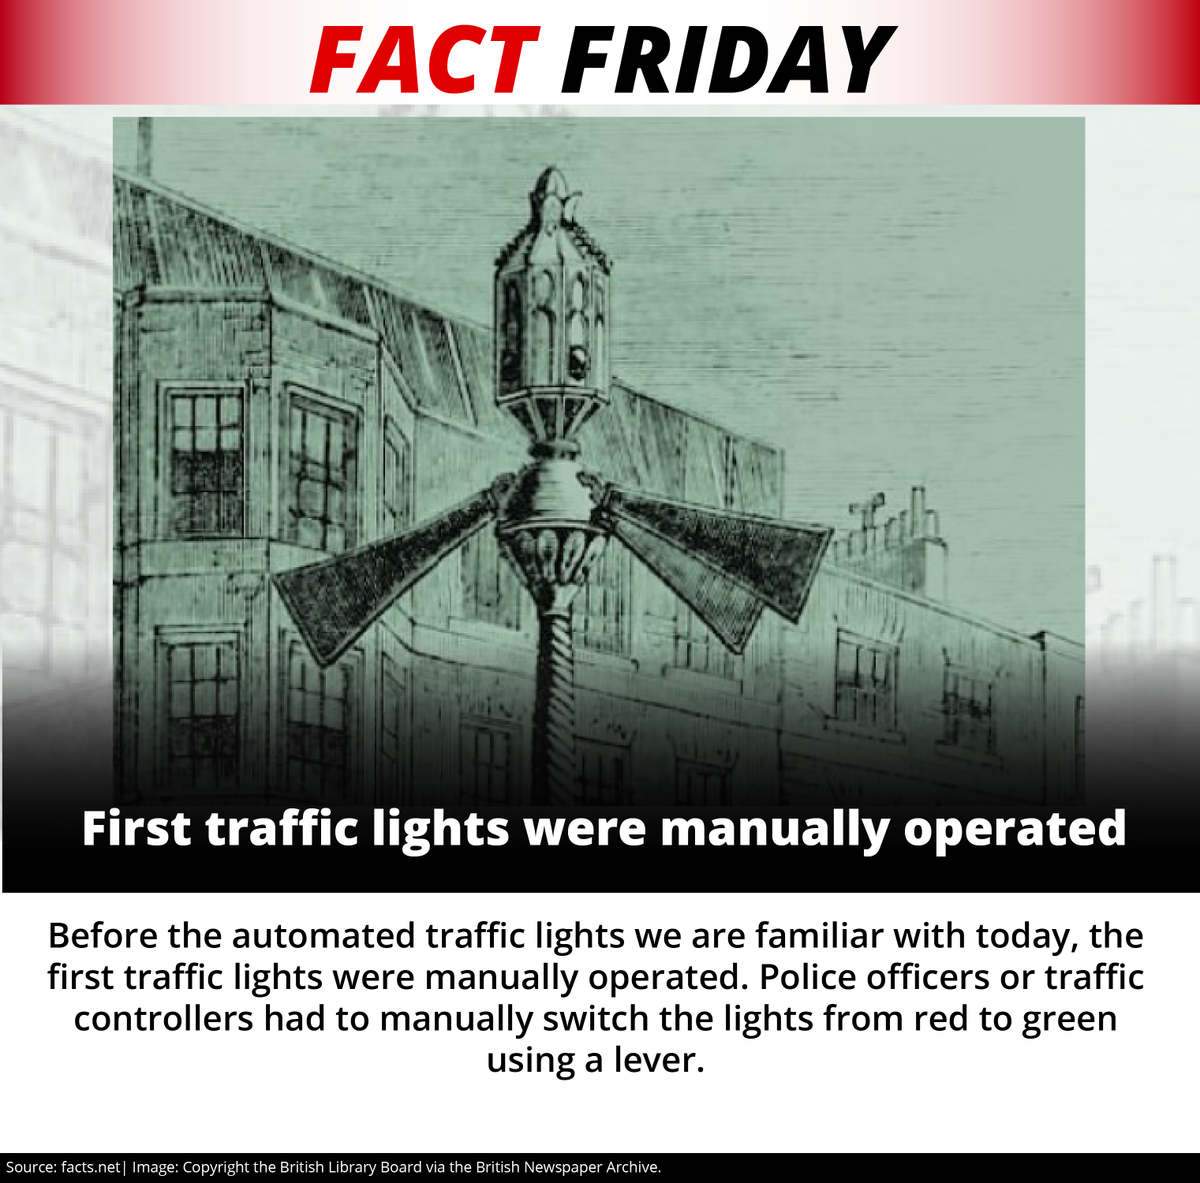 Did you know that the first traffic lights were manually operated?

#FactFriday #MasterDrive #FactCheck #trafficlights #DefensiveDriving #RoadSafety @_ArriveAlive